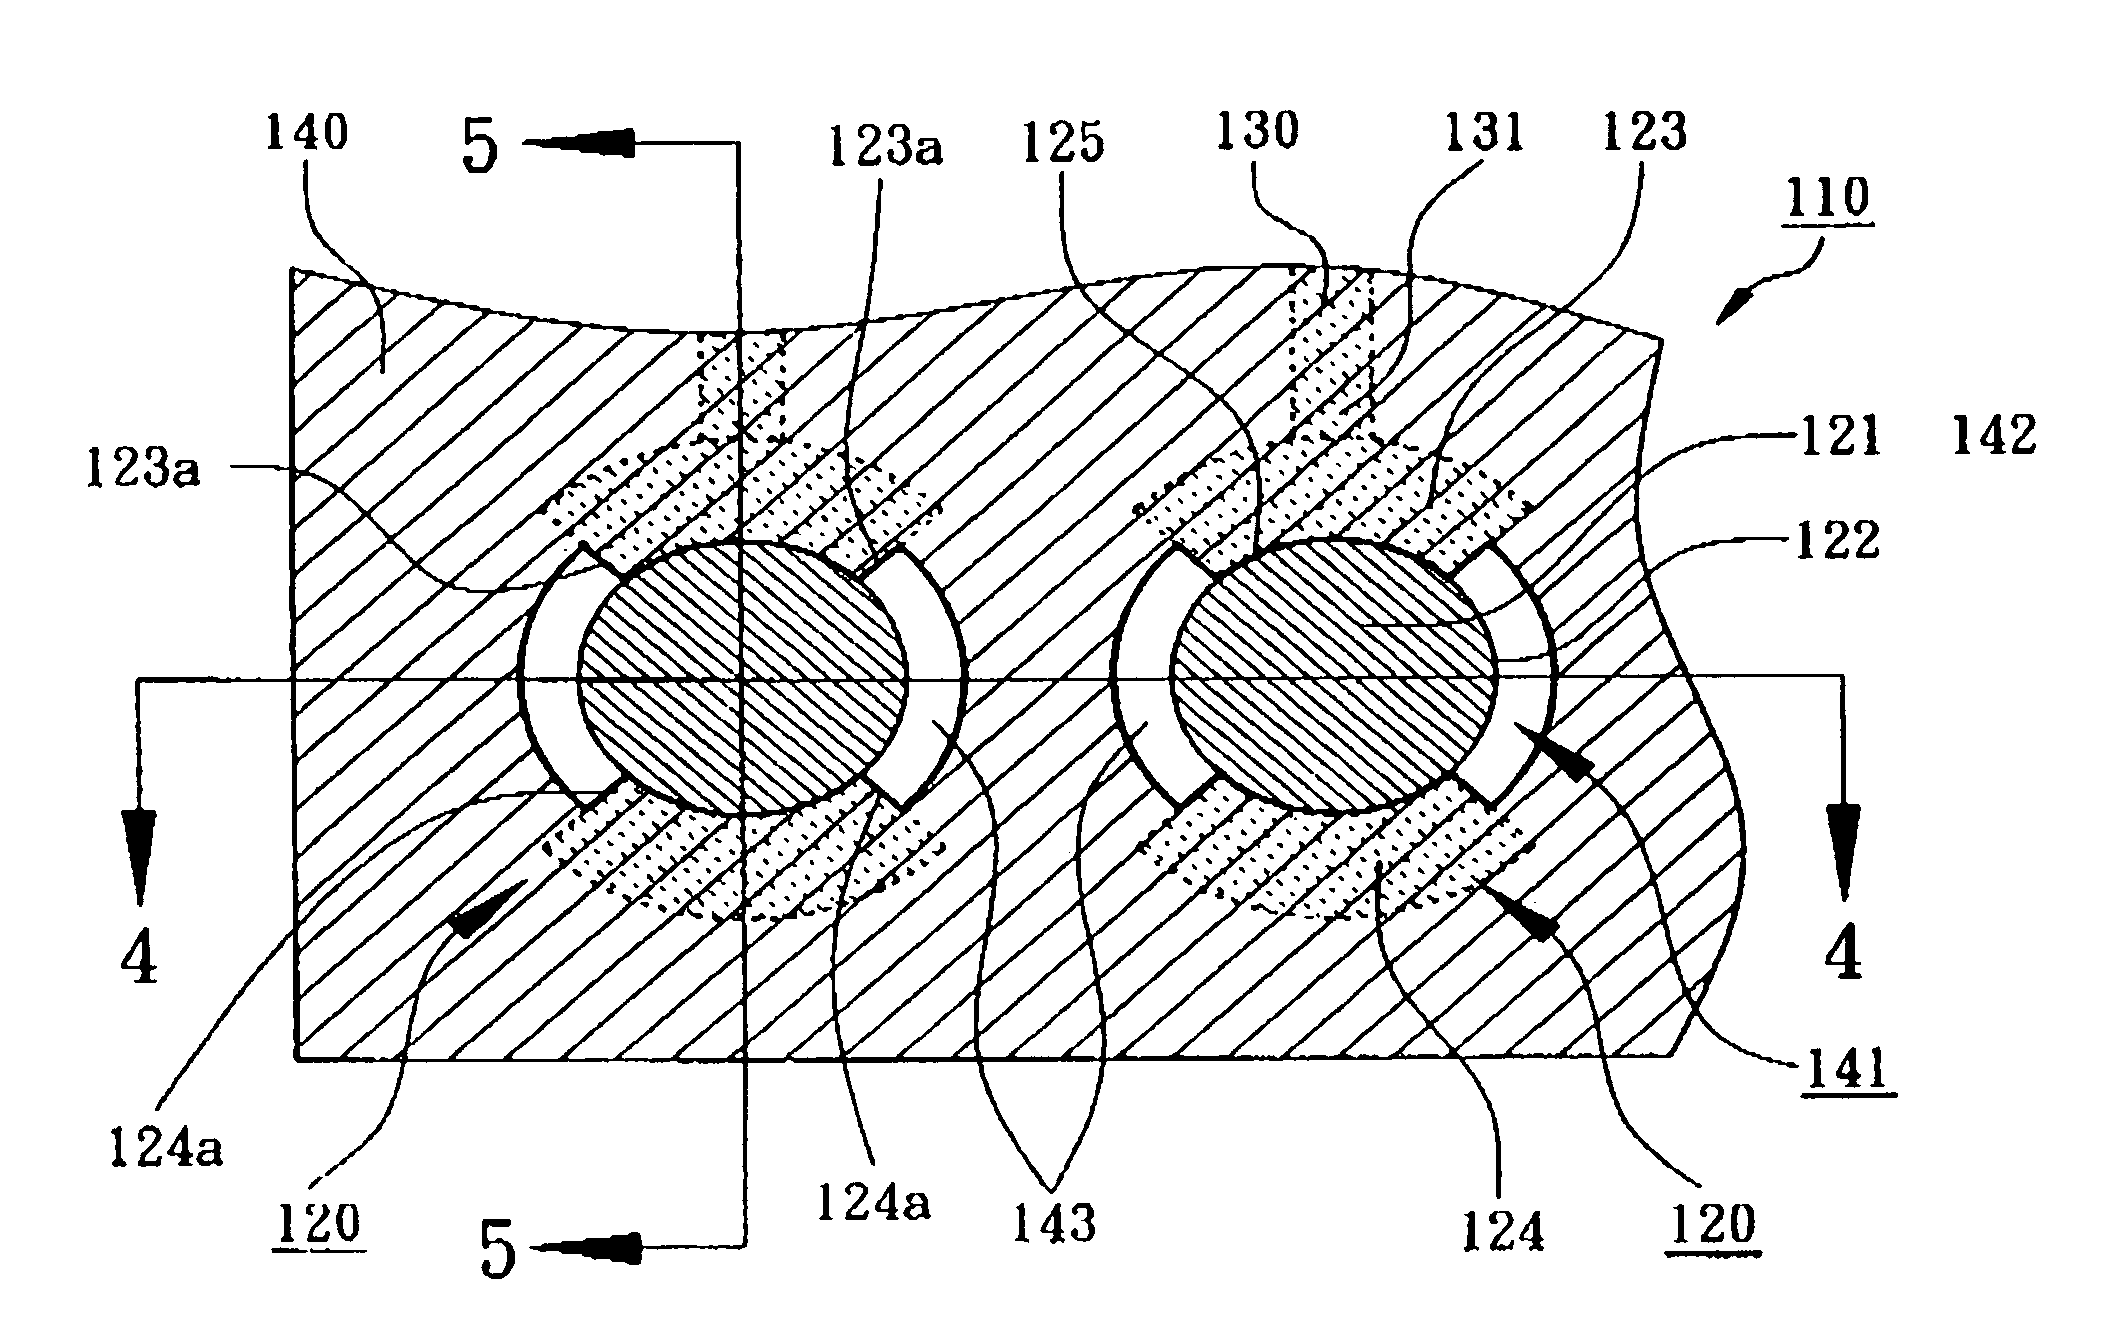 Substrate with reinforced contact pad structure